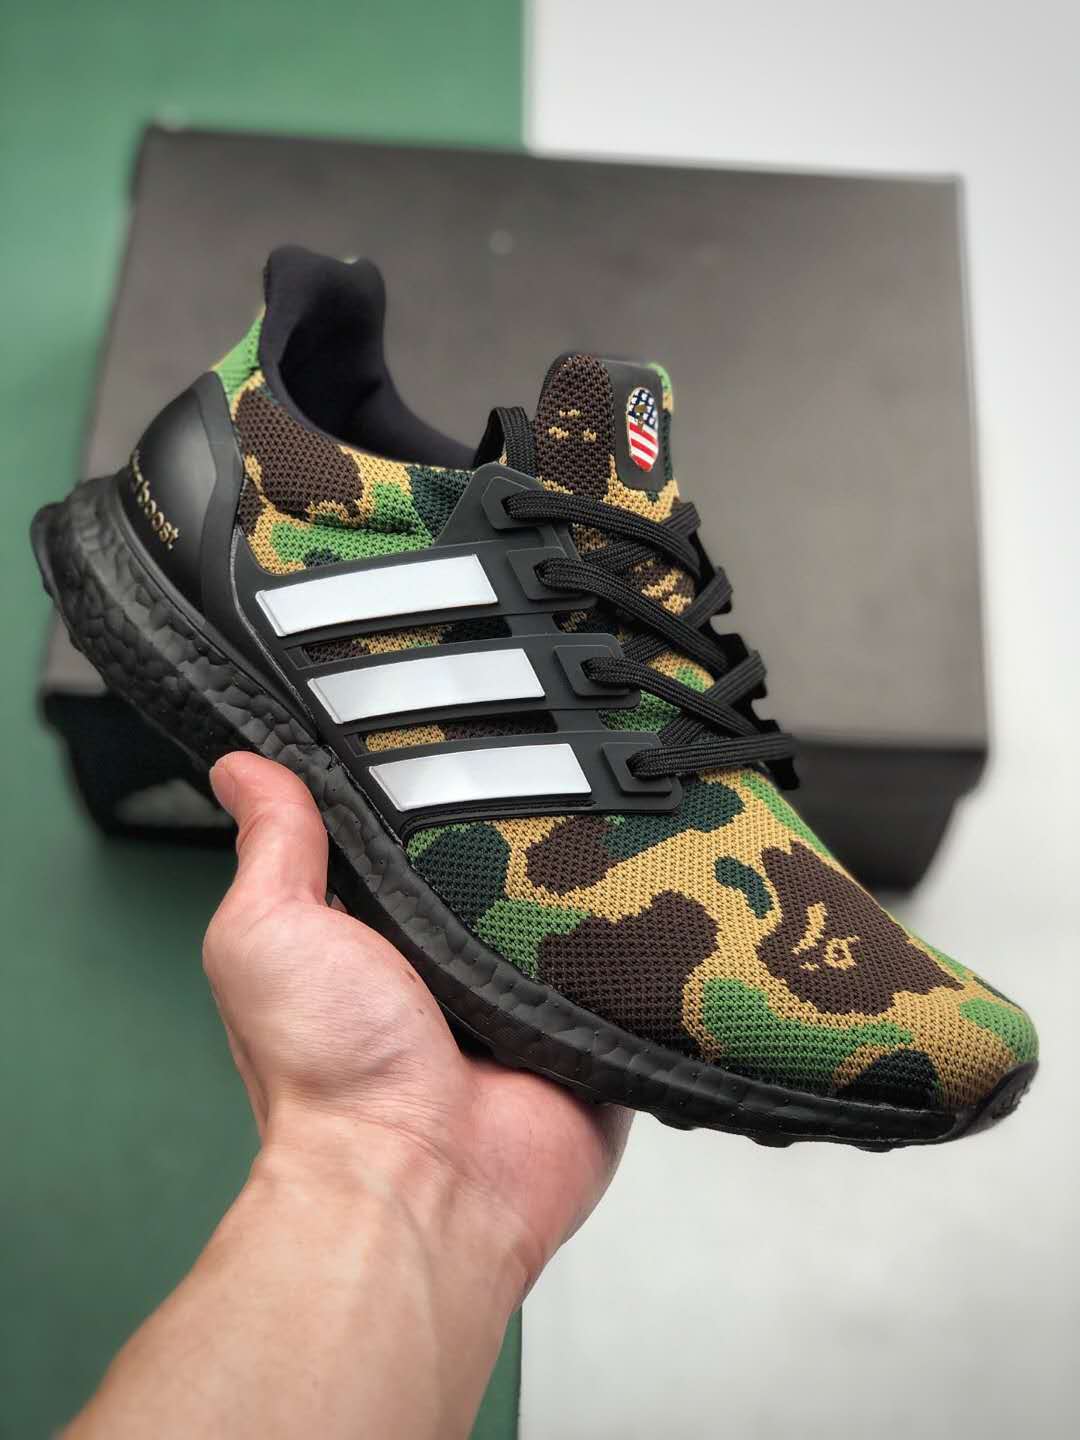 Adidas A Bathing Ape x UltraBoost 4.0 'Green Camo' F35097 - Stylish Collaboration for Sneaker Enthusiasts